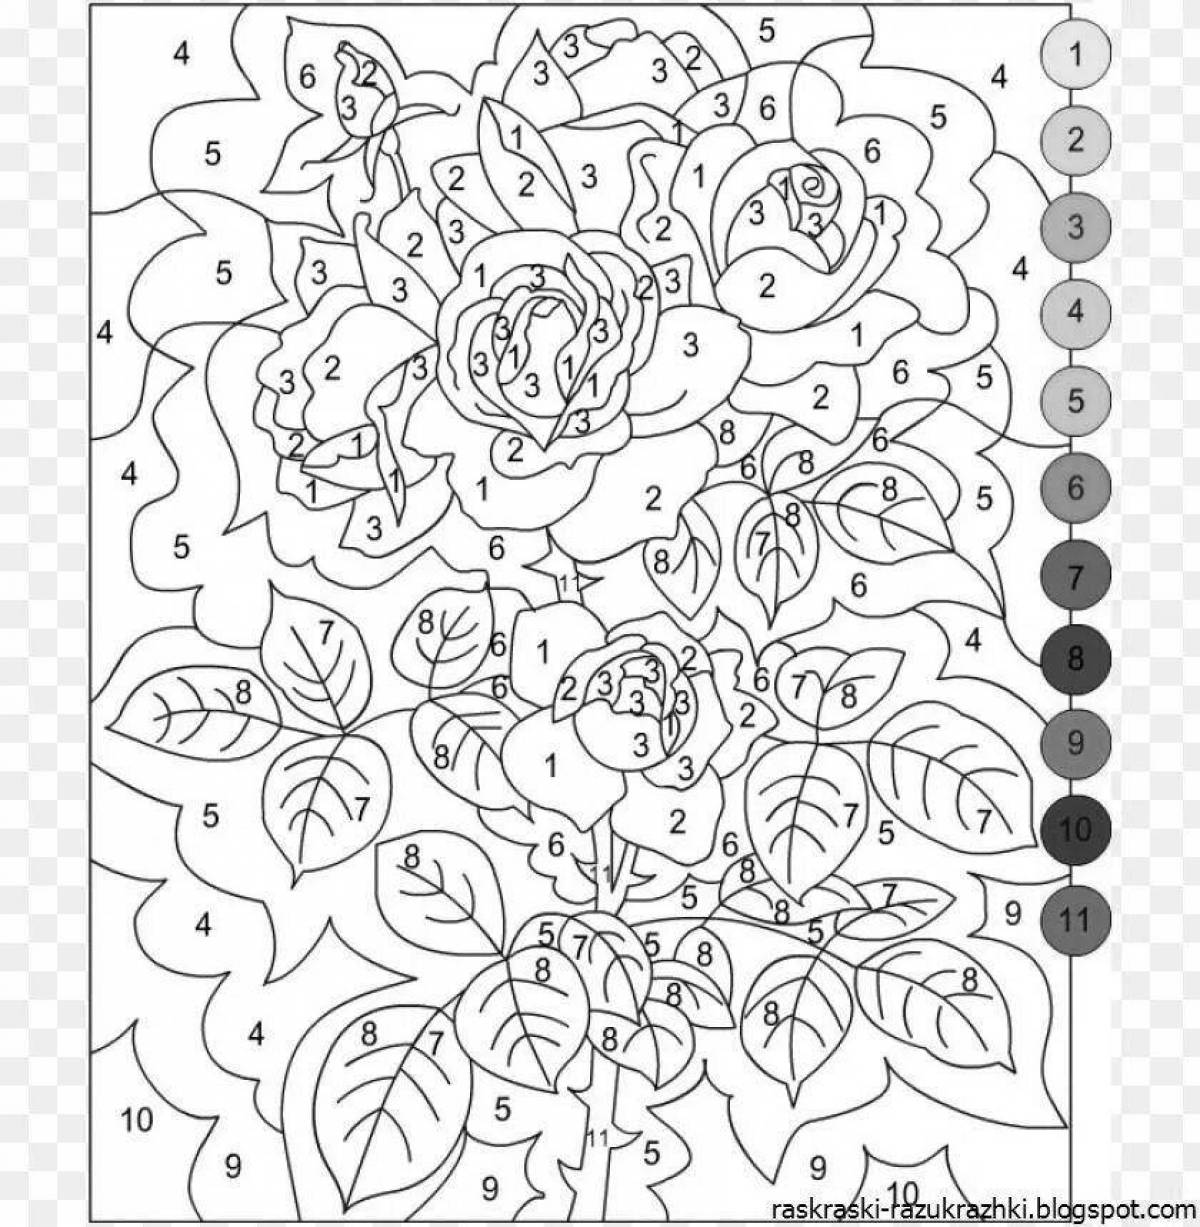 Fun challenging coloring games